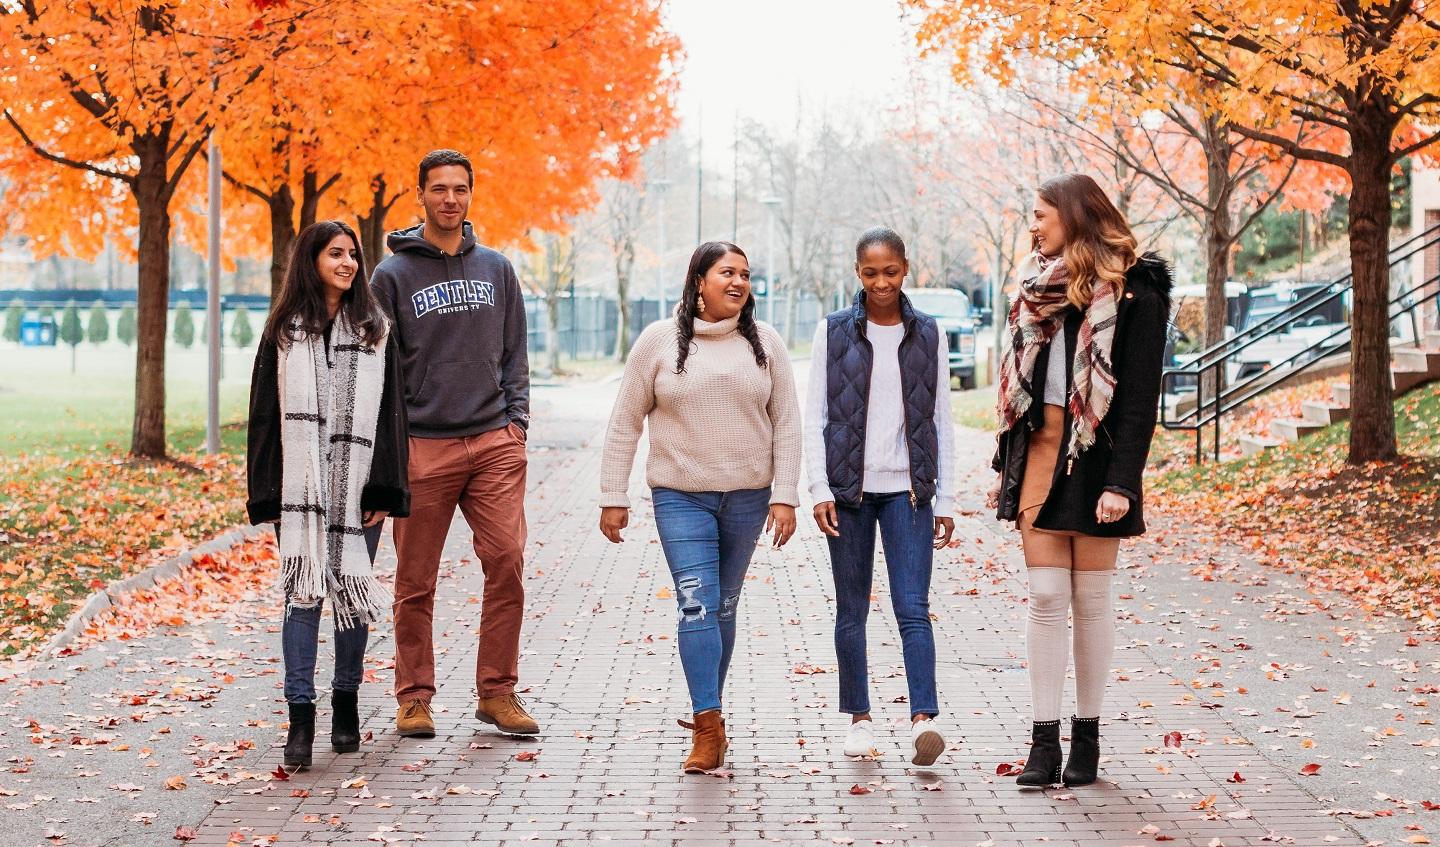 Students stroll together on Bentley campus